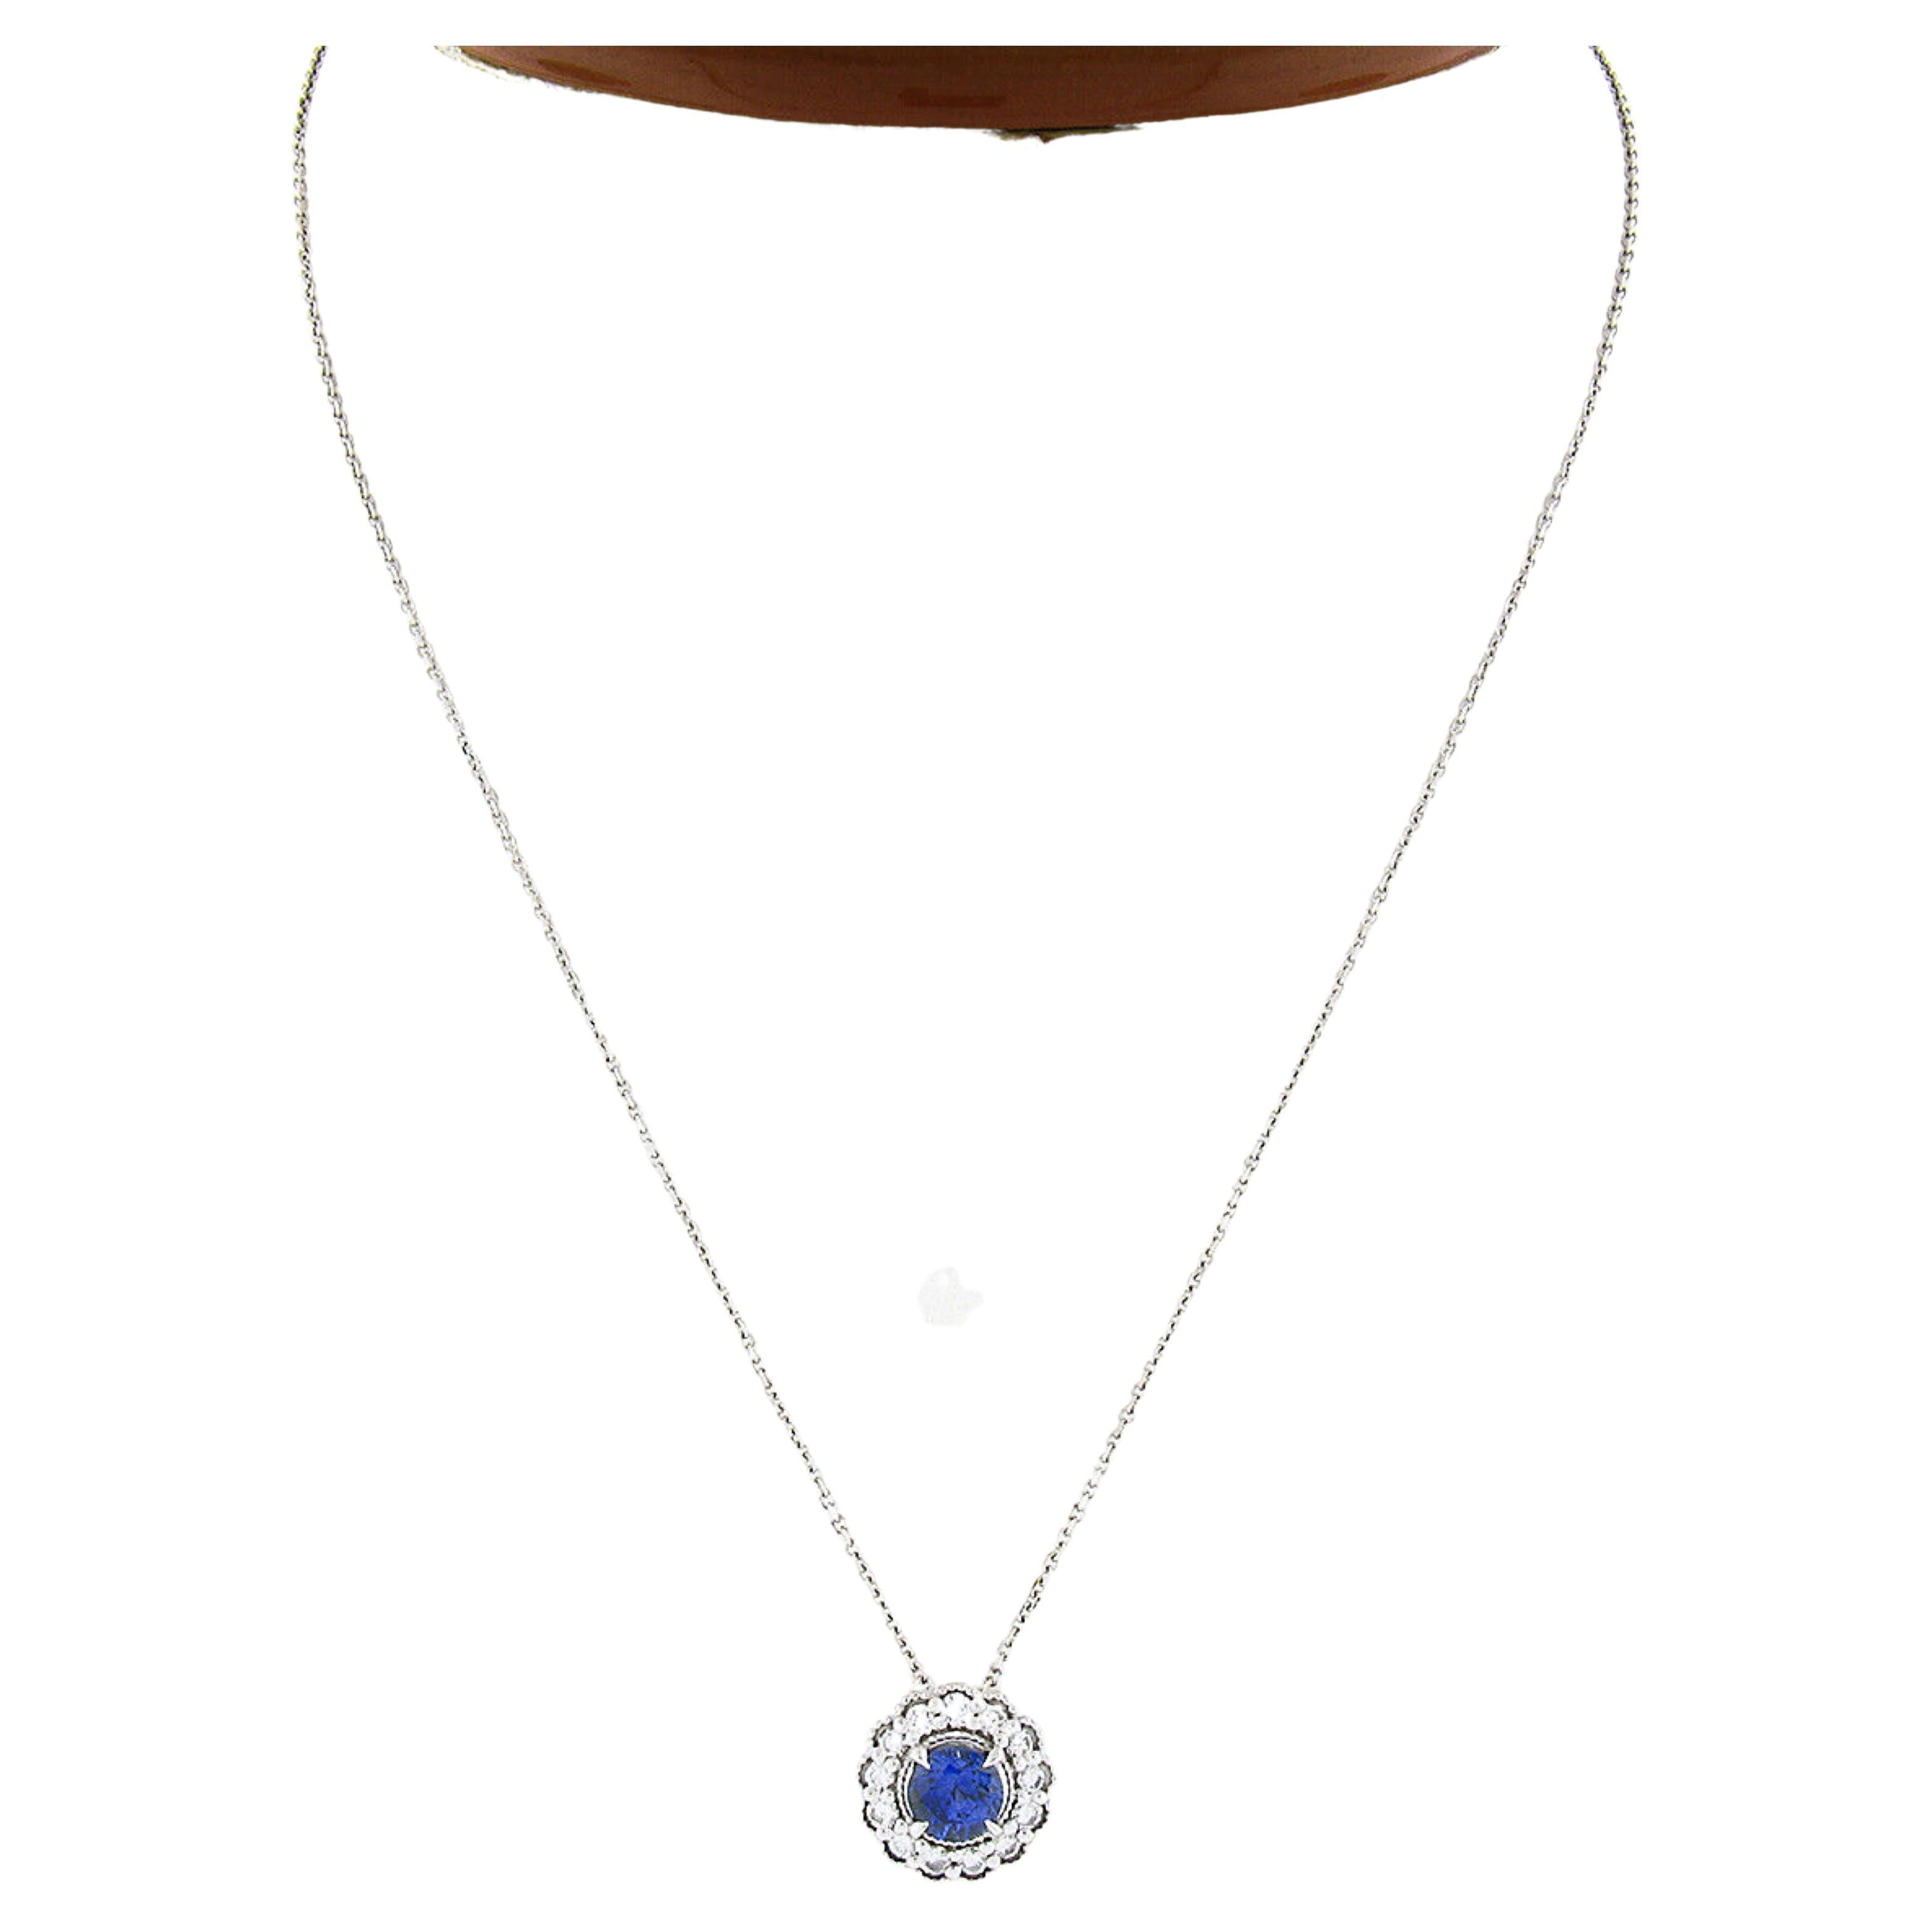 This stunning pendant necklace is newly crafted in solid 14k white gold and features a gorgeous sapphire neatly prong set at the center of a fiery diamond halo. The round brilliant cut sapphire is an attractive size, weighing exactly 1.03 carats,